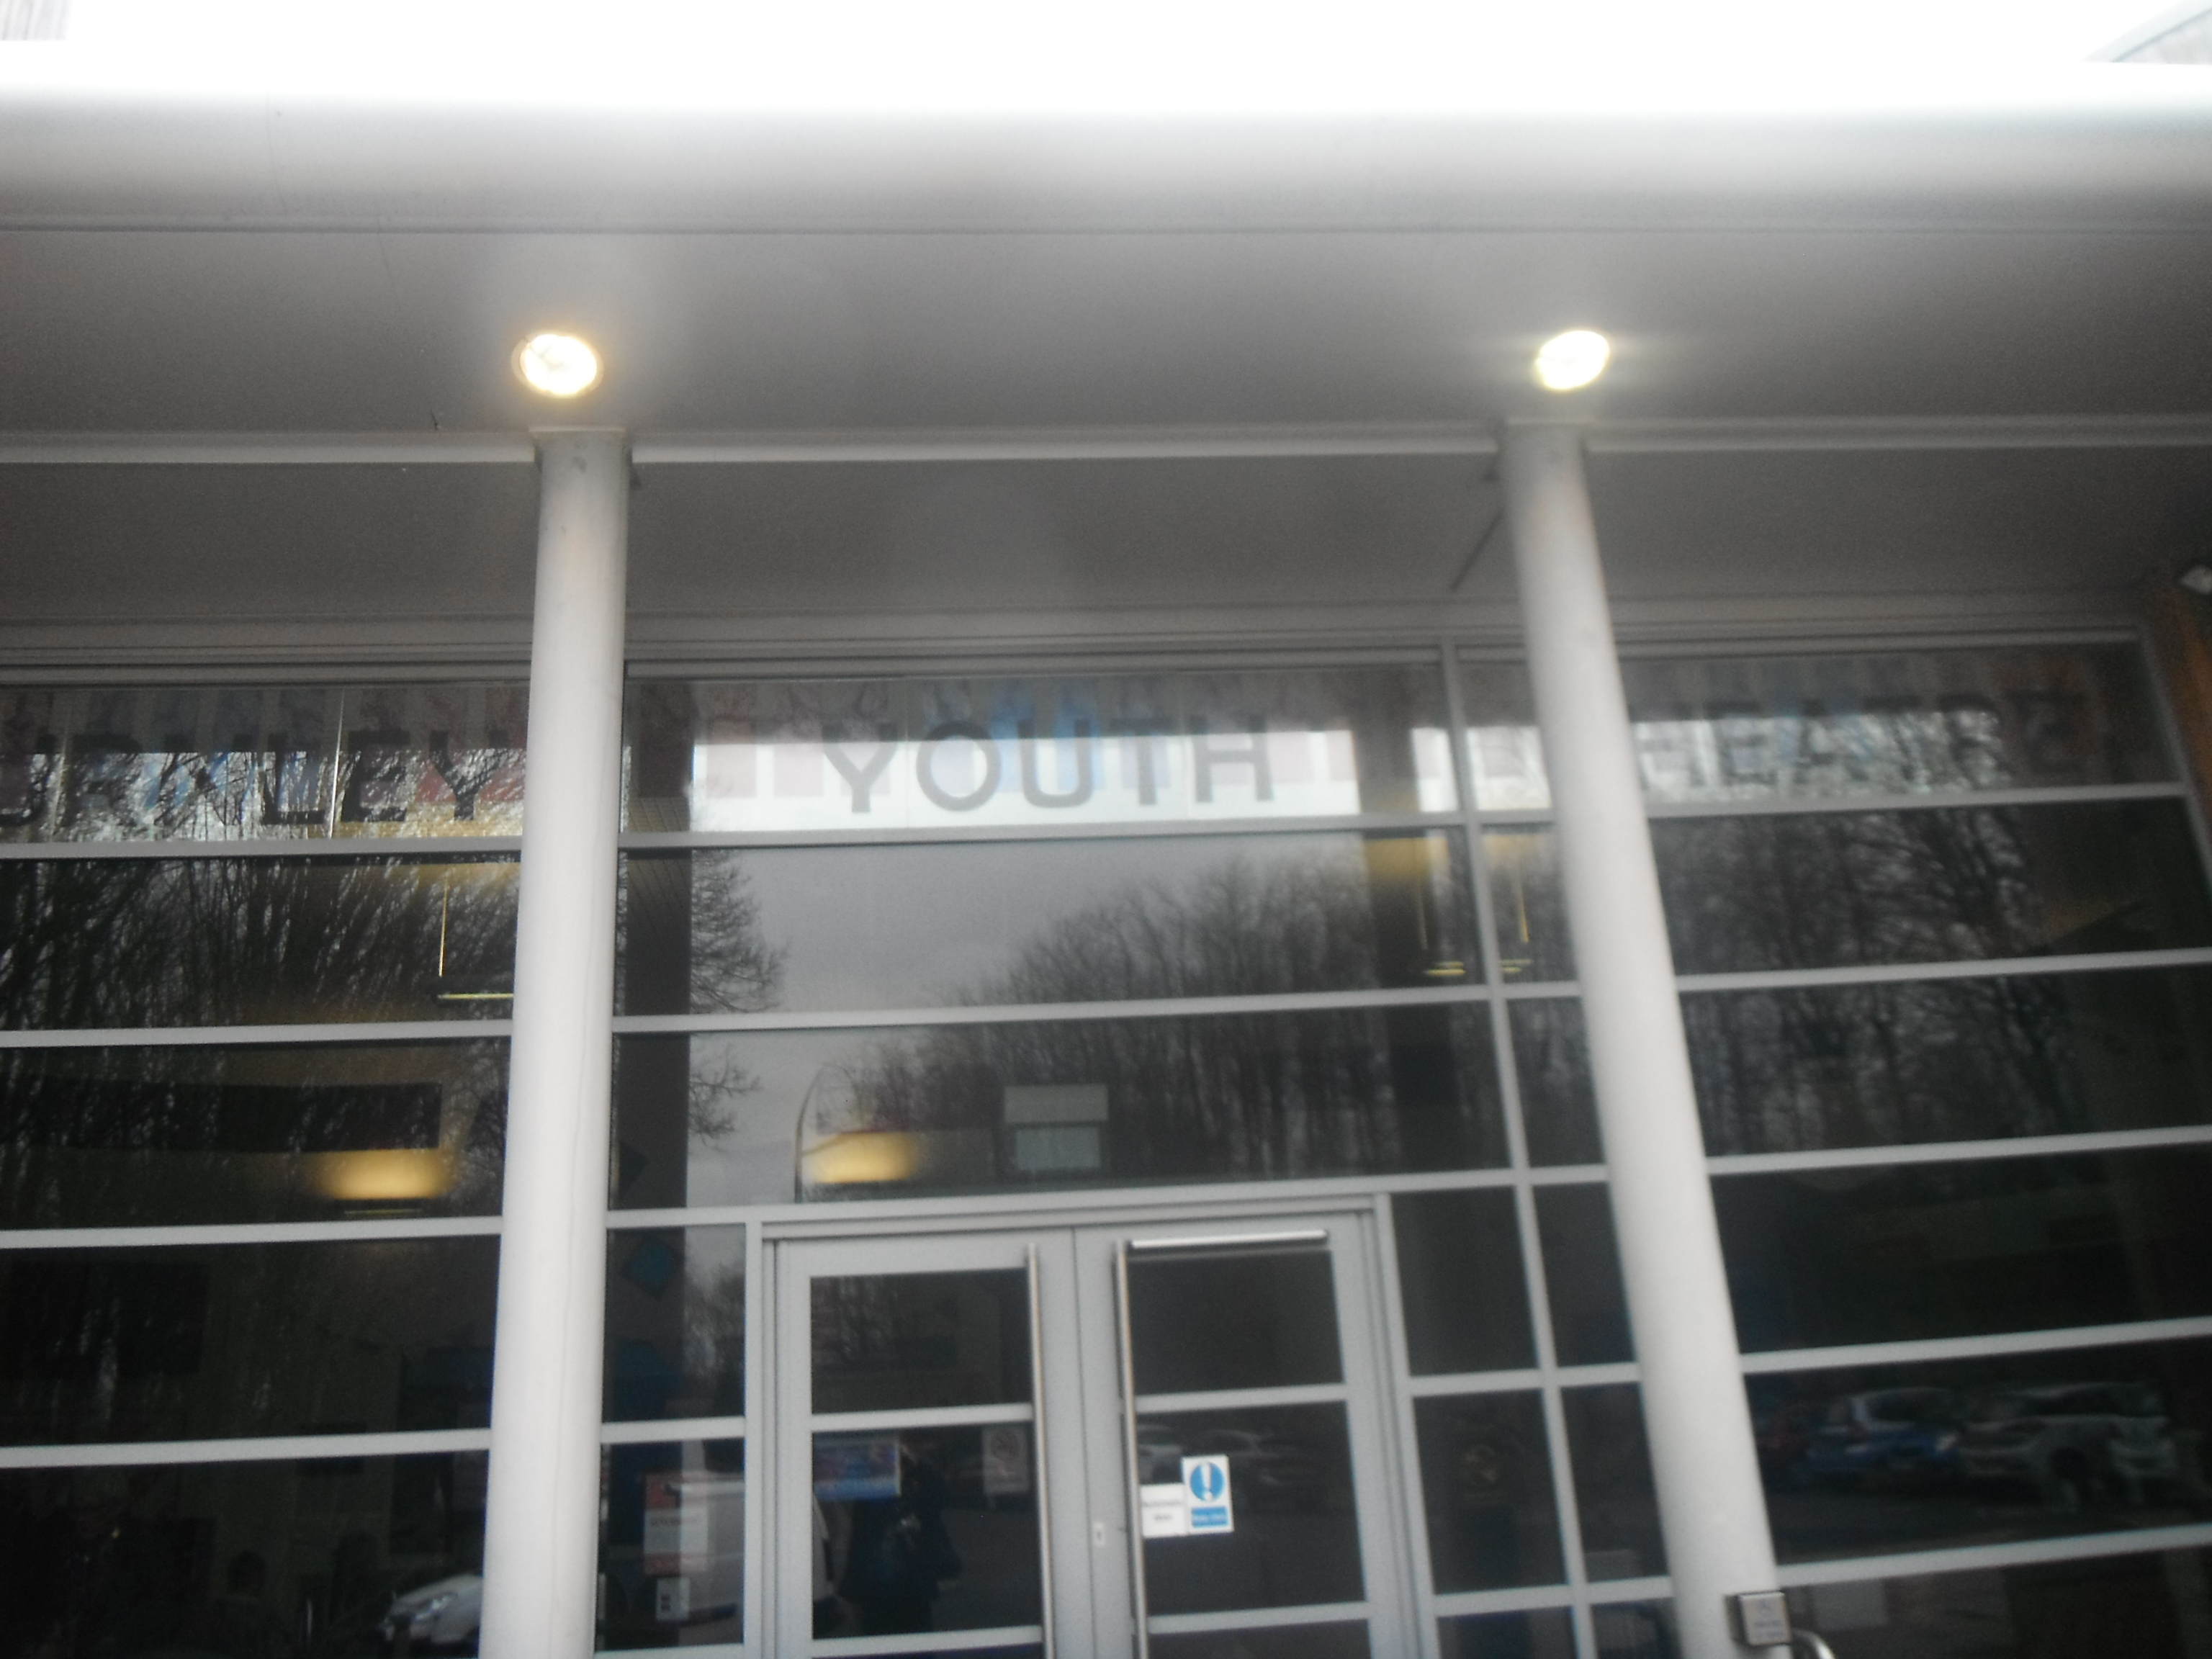 Burnley.Youth.Theatre.- photo taken by me